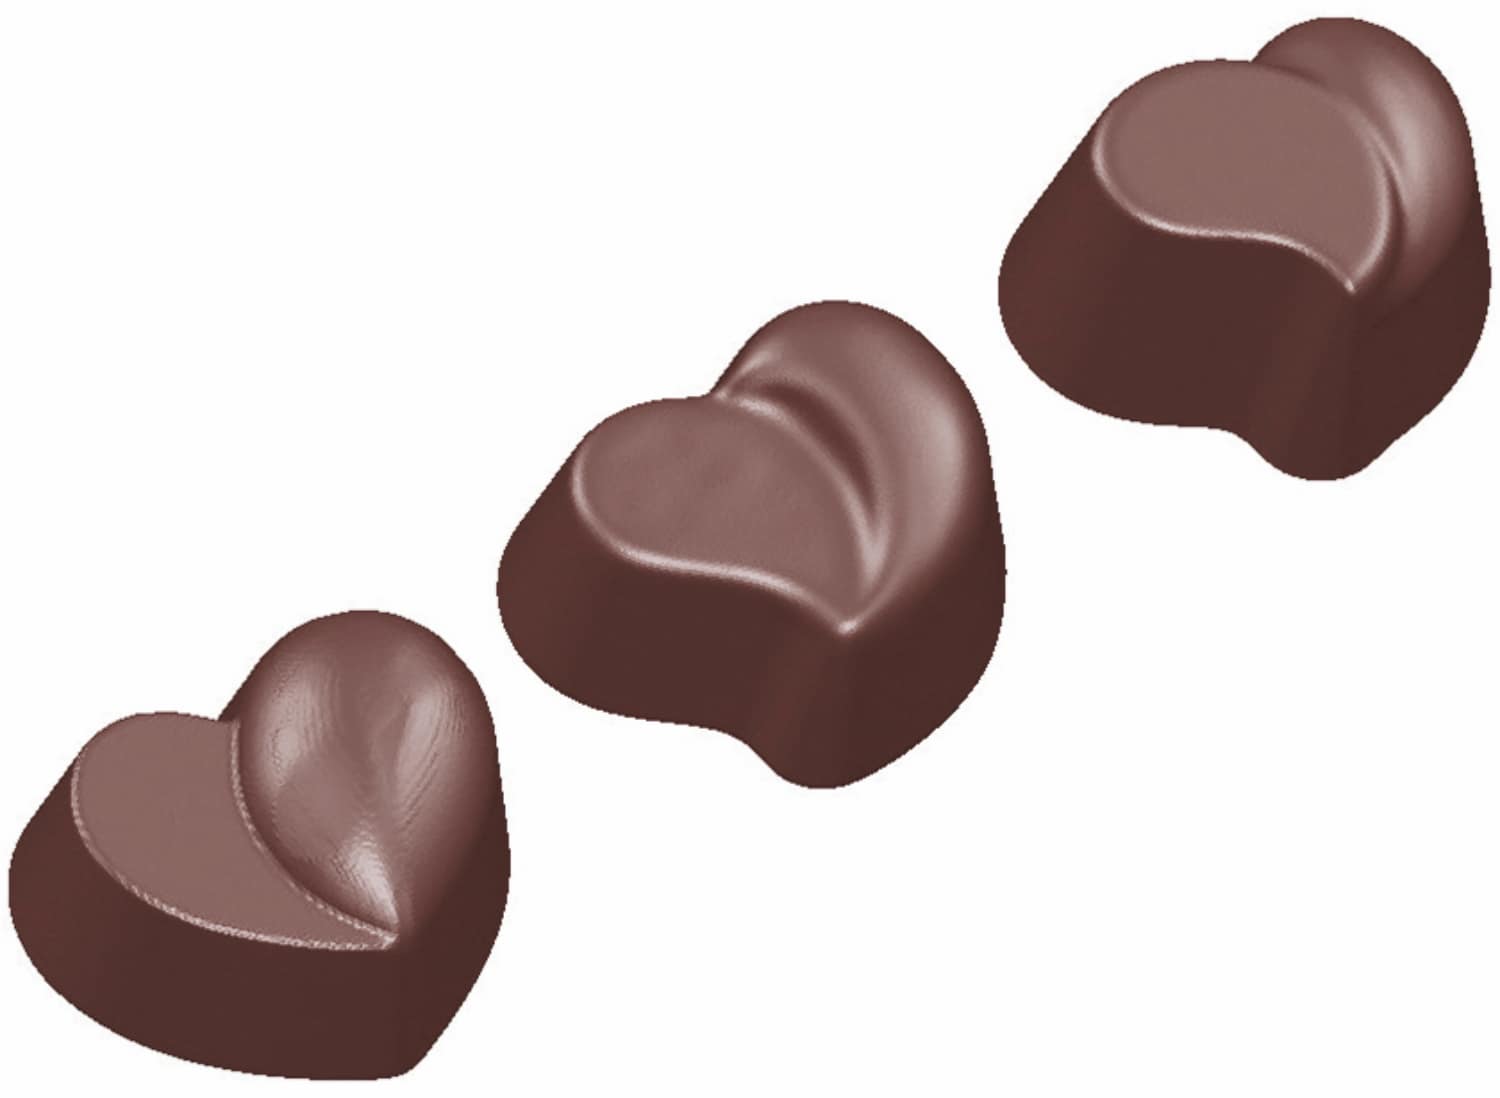 Chocolate mould "3 hearts" 421576 421576